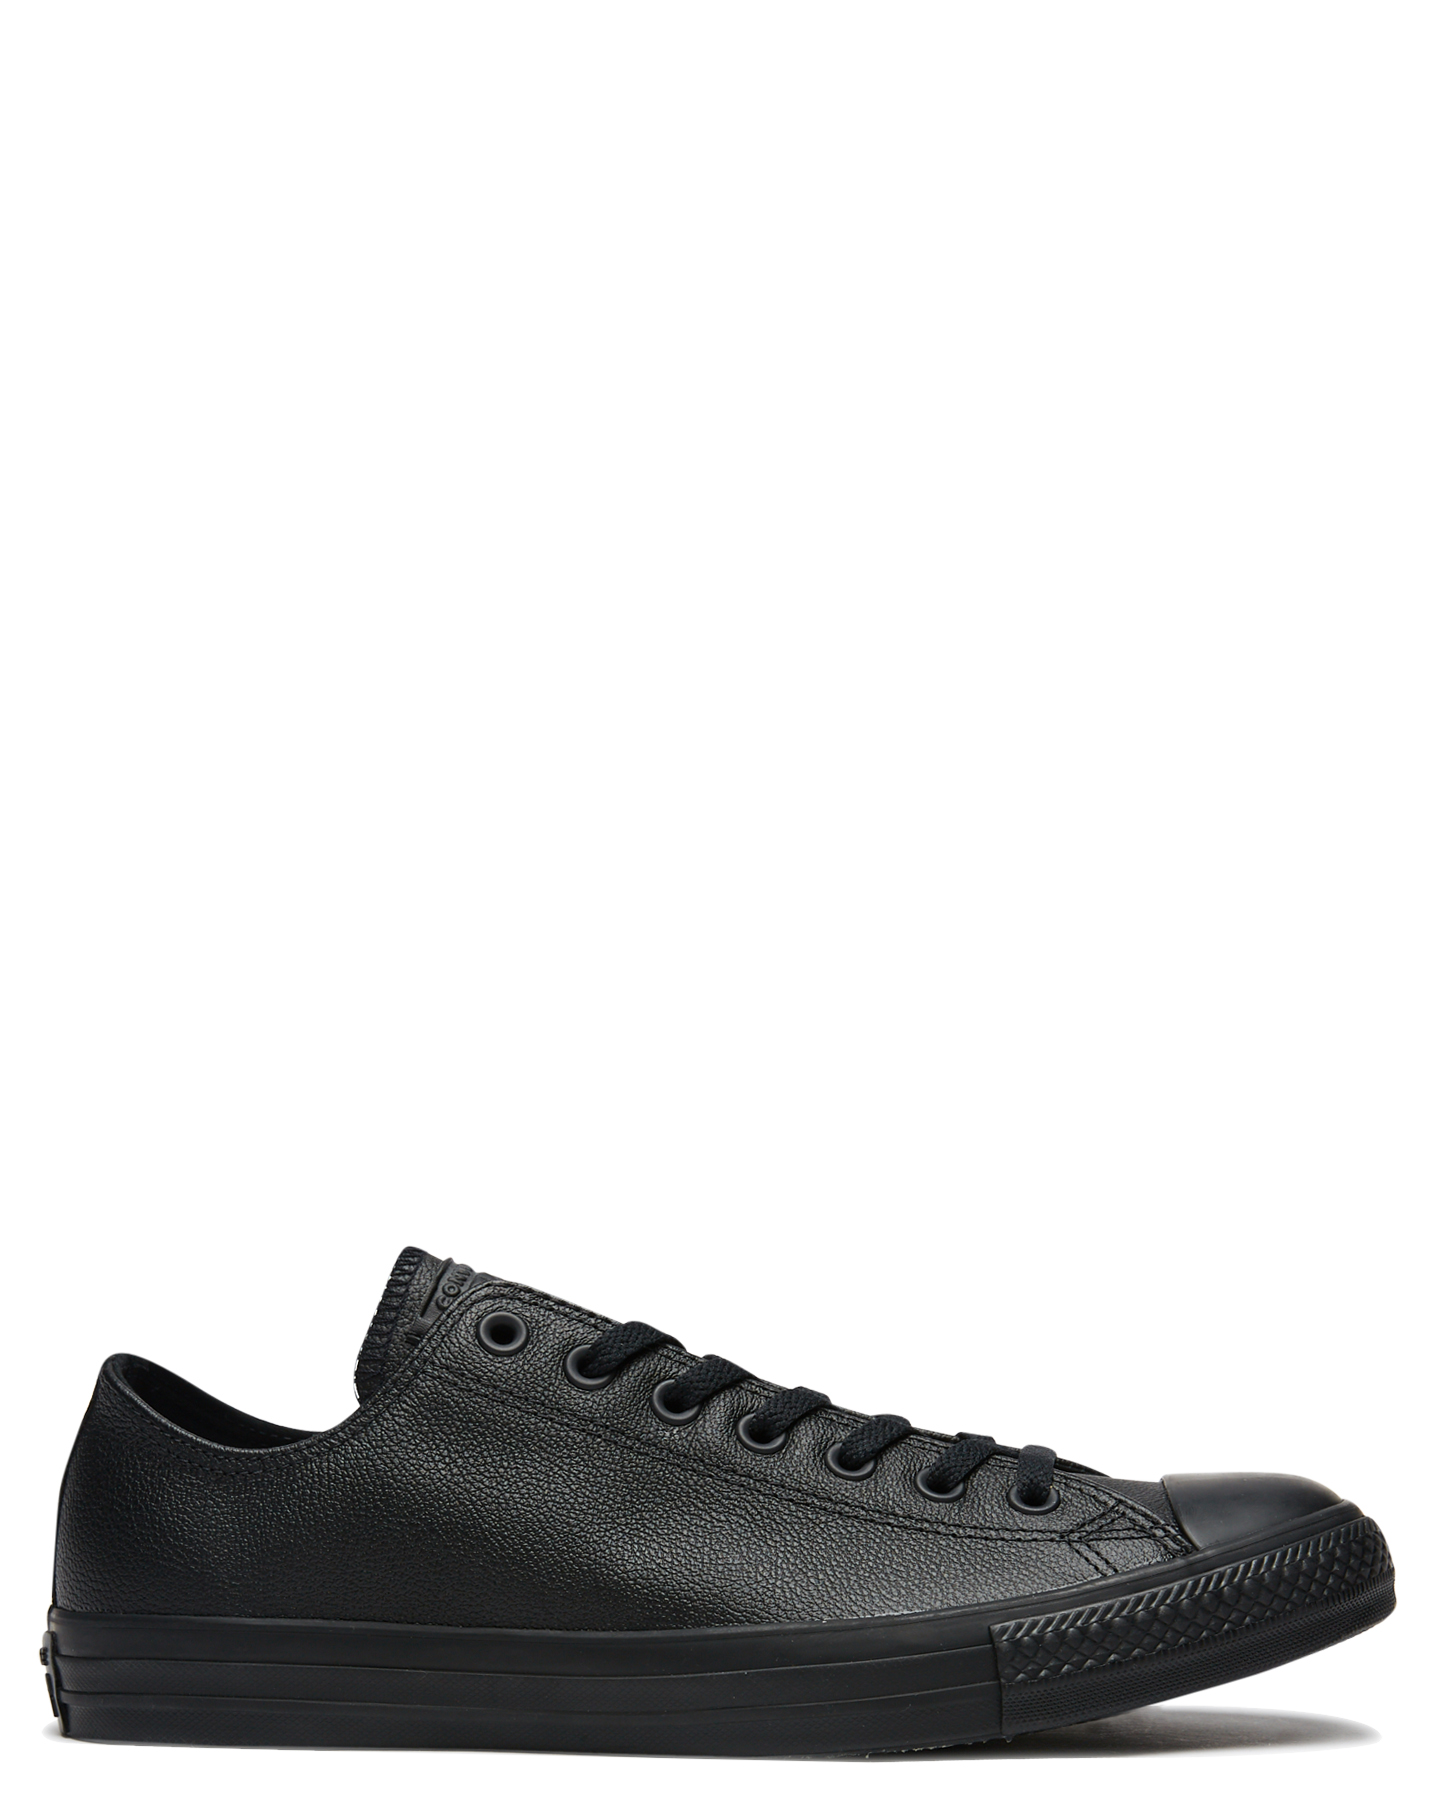 black leather converse womens high tops